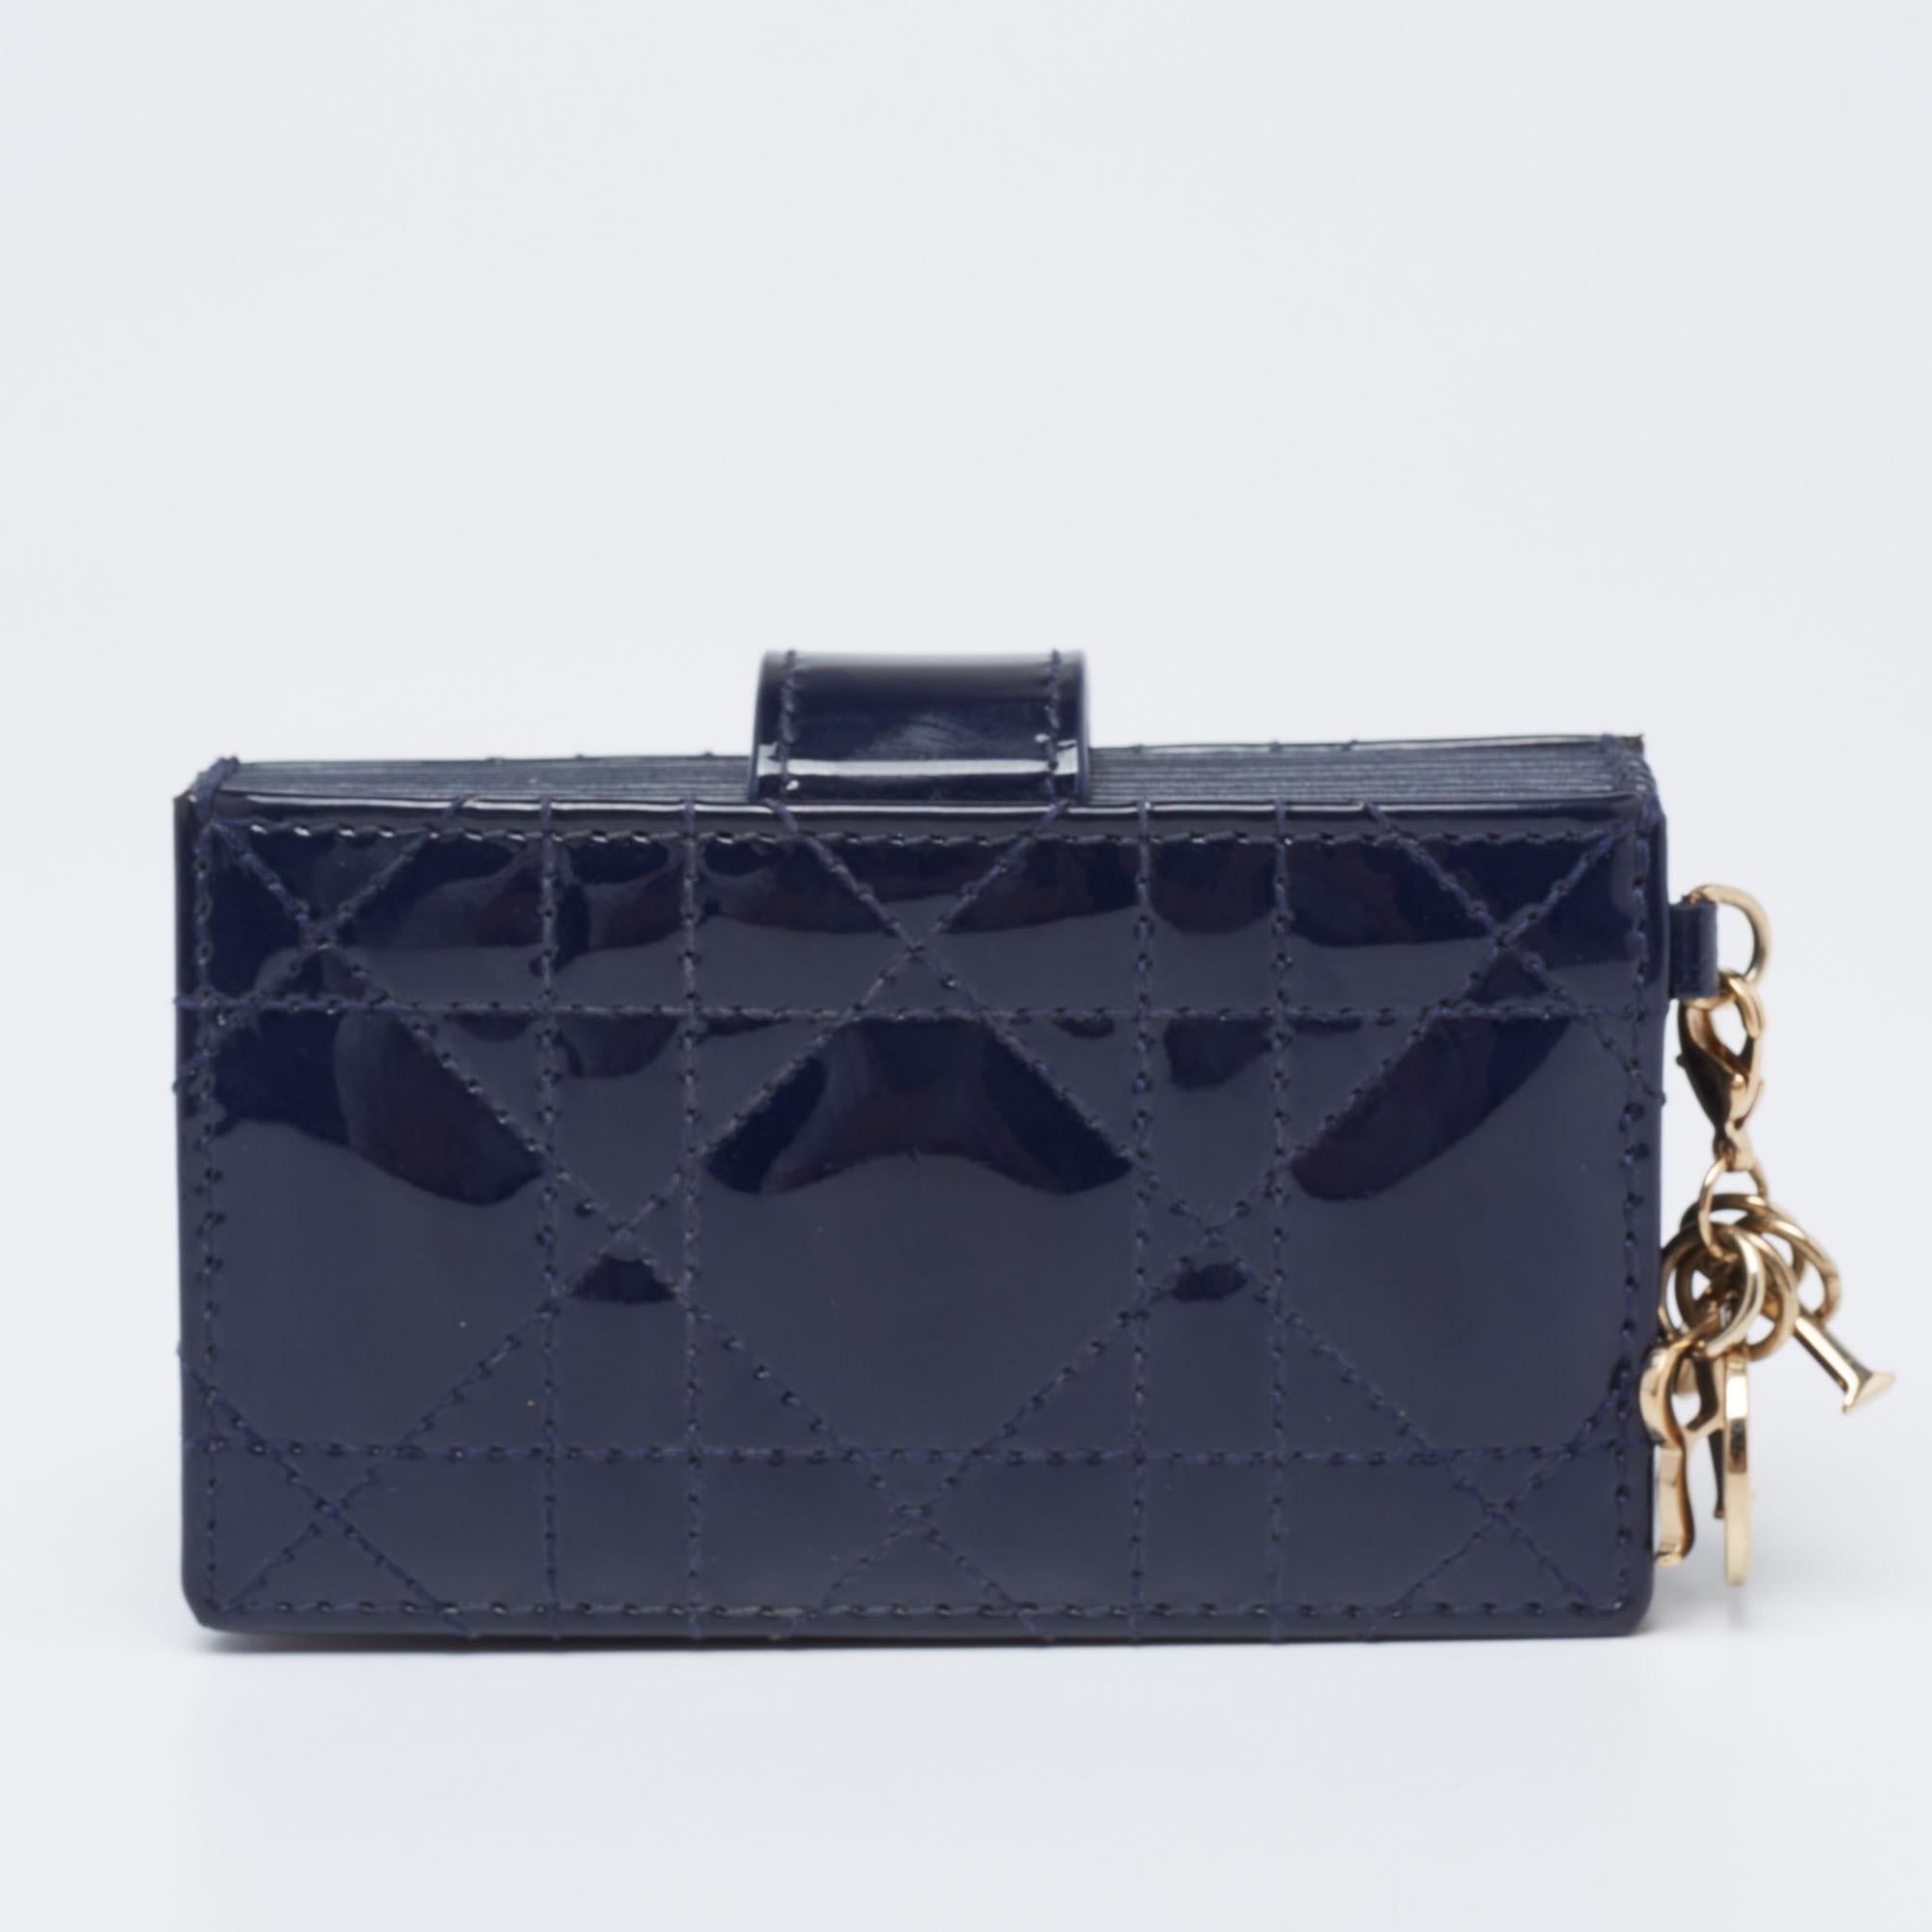 Crafted from patent leather, this Dior gusset cardholder opens to reveal multiple compartments to carry your cards neatly. It also features the brand's iconic Cannage quilt on the exterior. This blue piece is finished with gold-tone hardware and